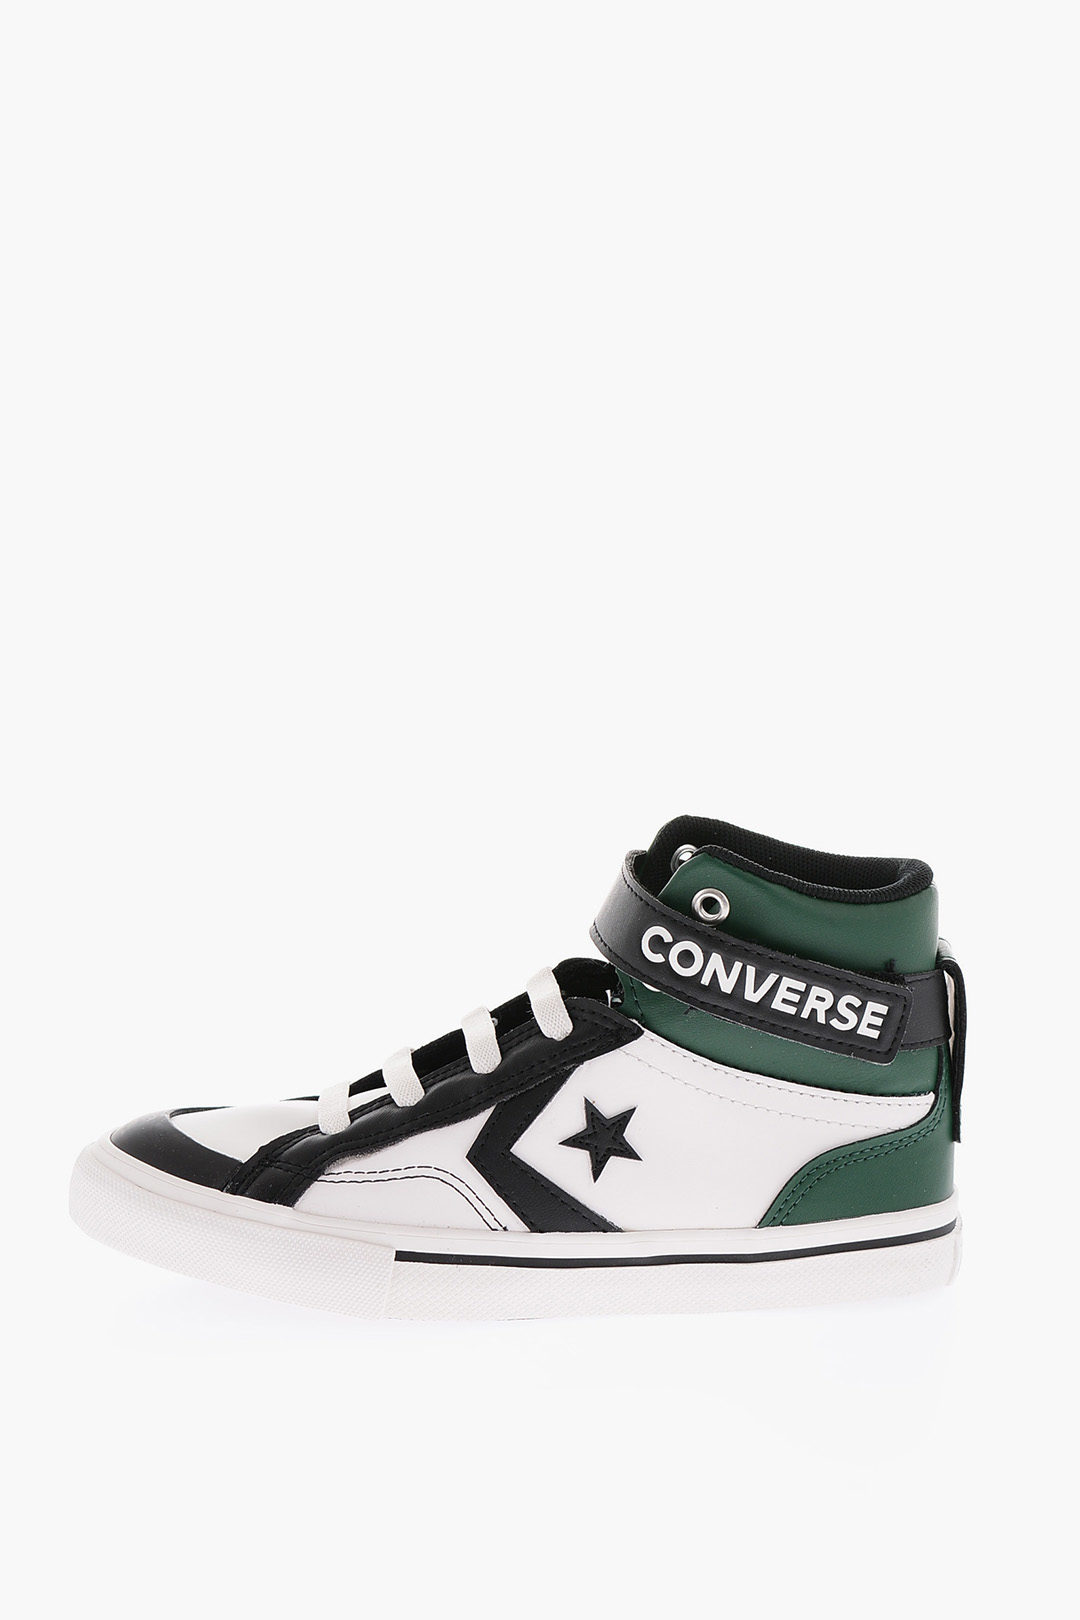 KIDS ALL Leather High Top Sneakers unisex children boys girls - Glamood